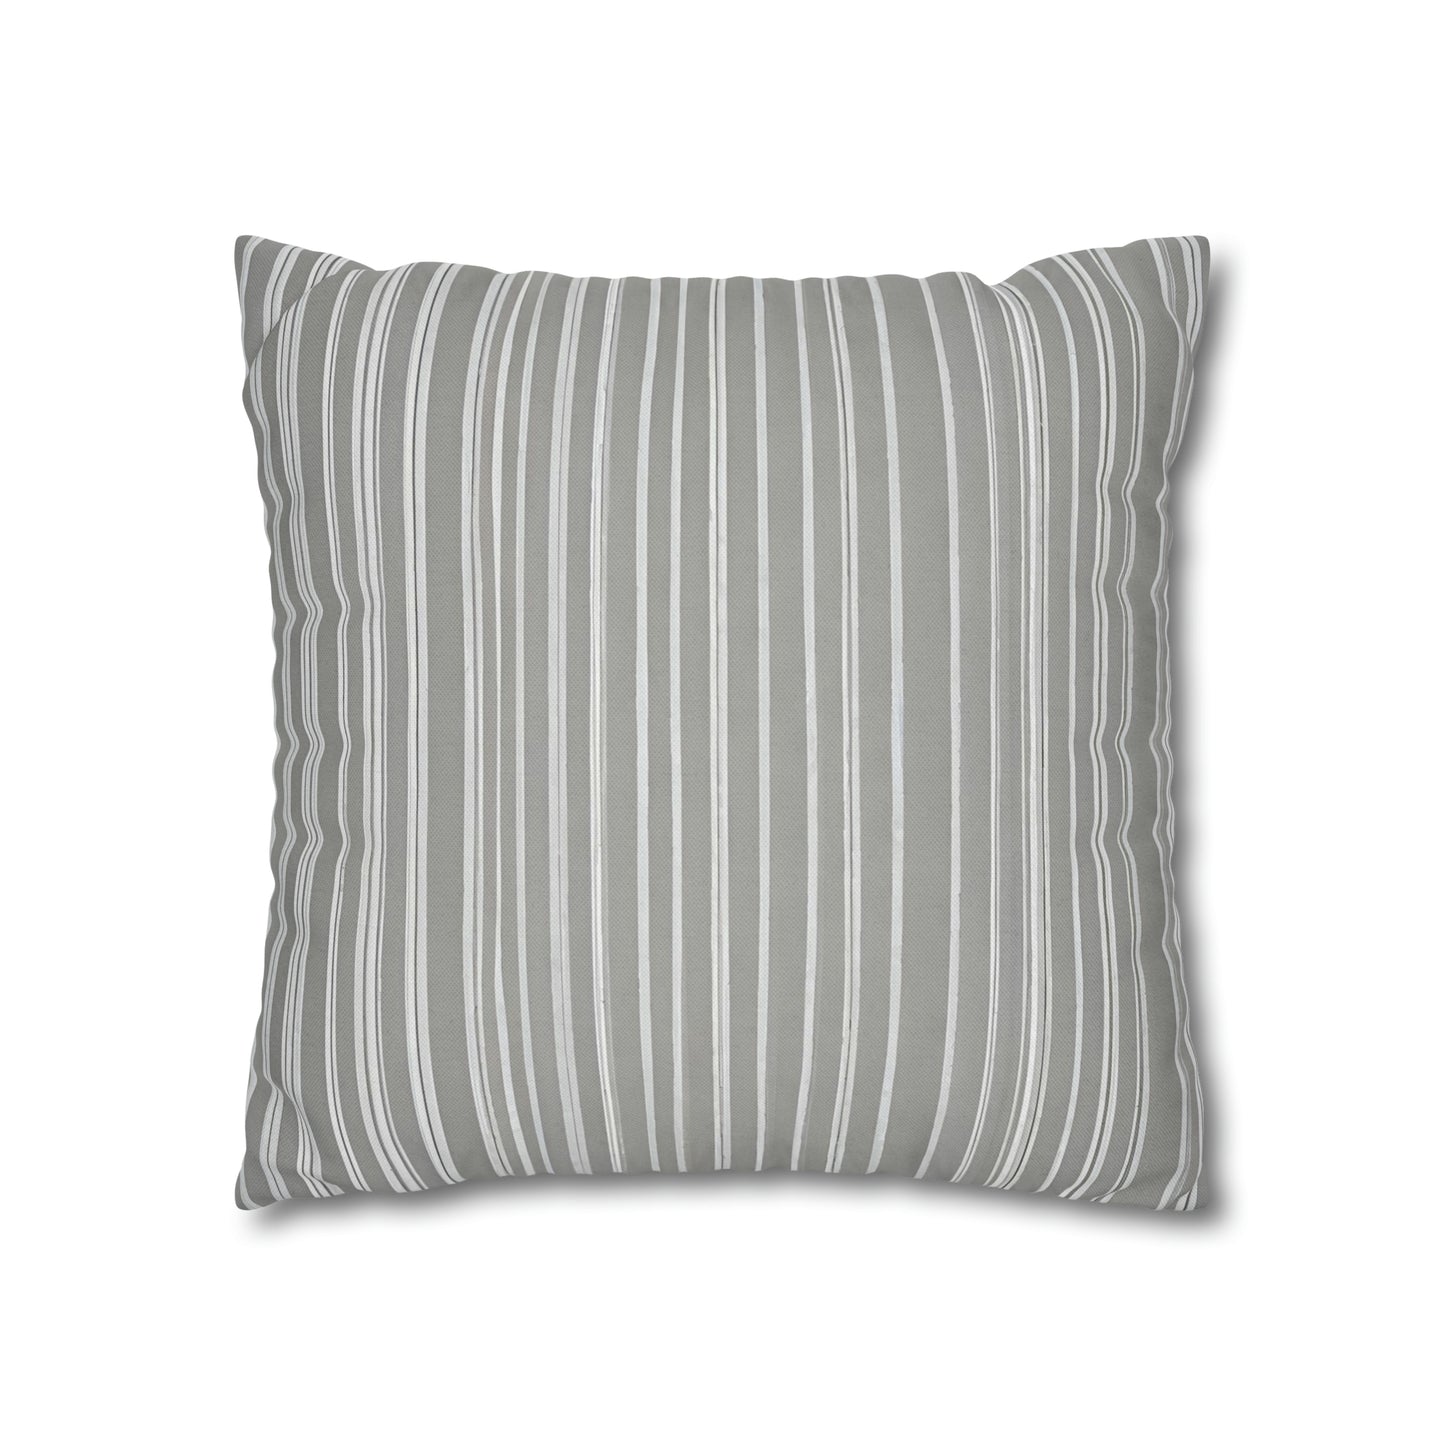 French Provincial Grey and White Stripes